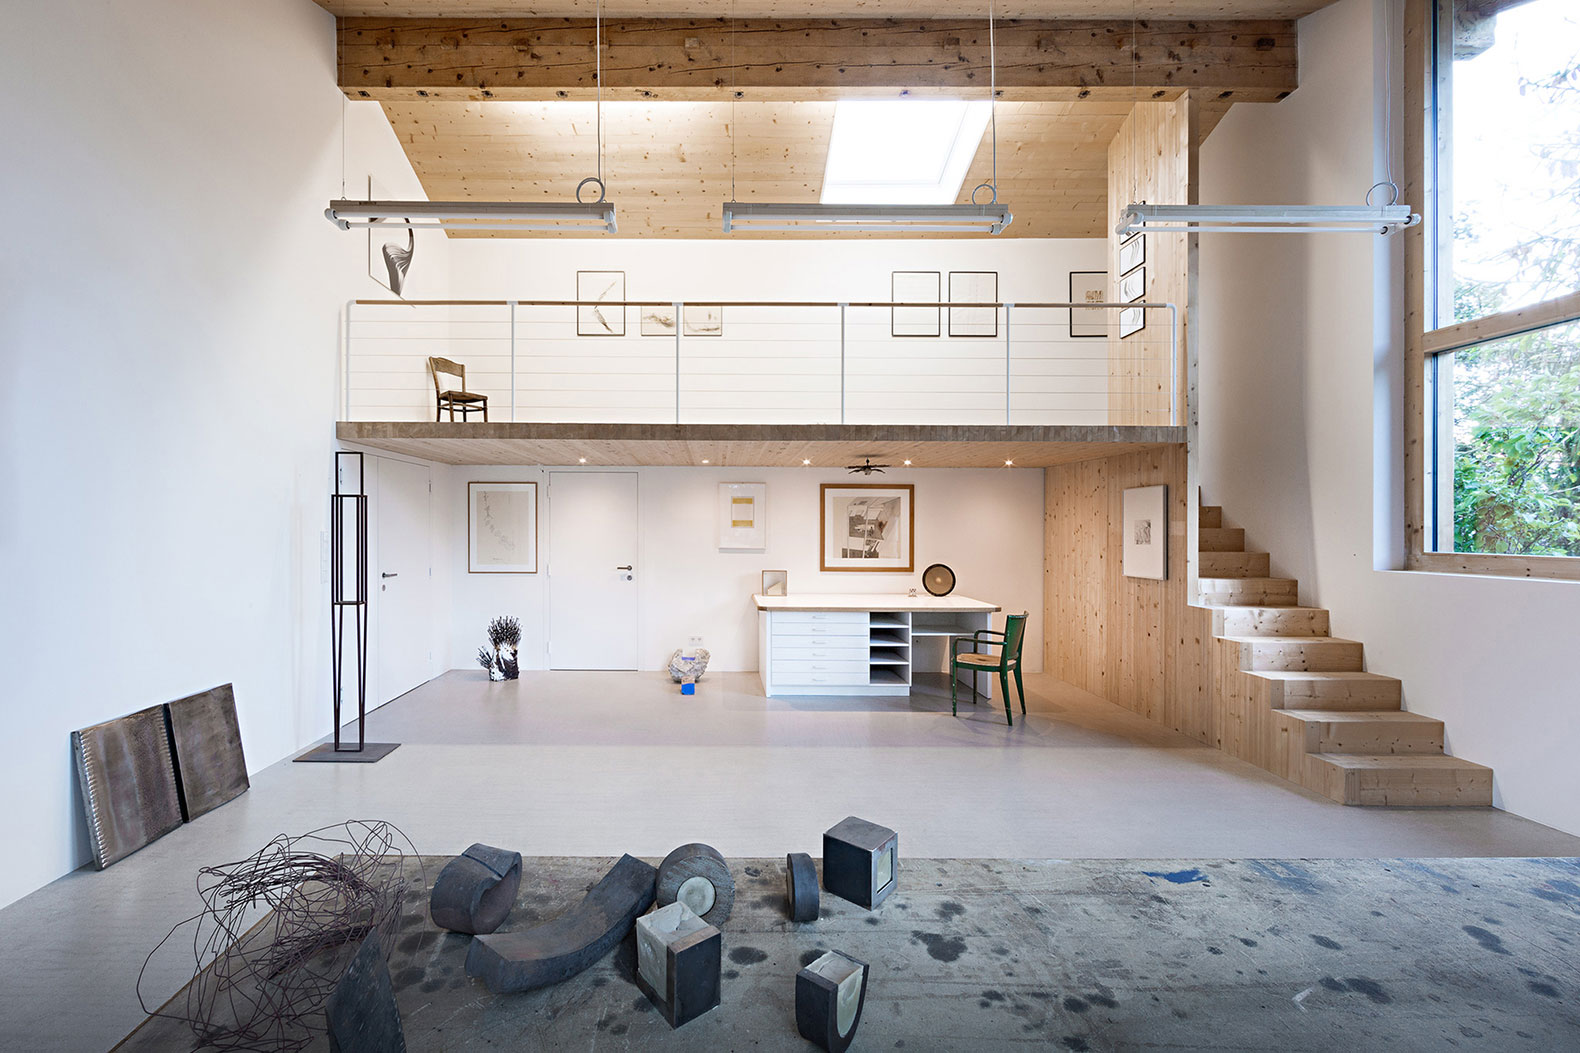 08. Workshop Renovation by Messner Architects 10